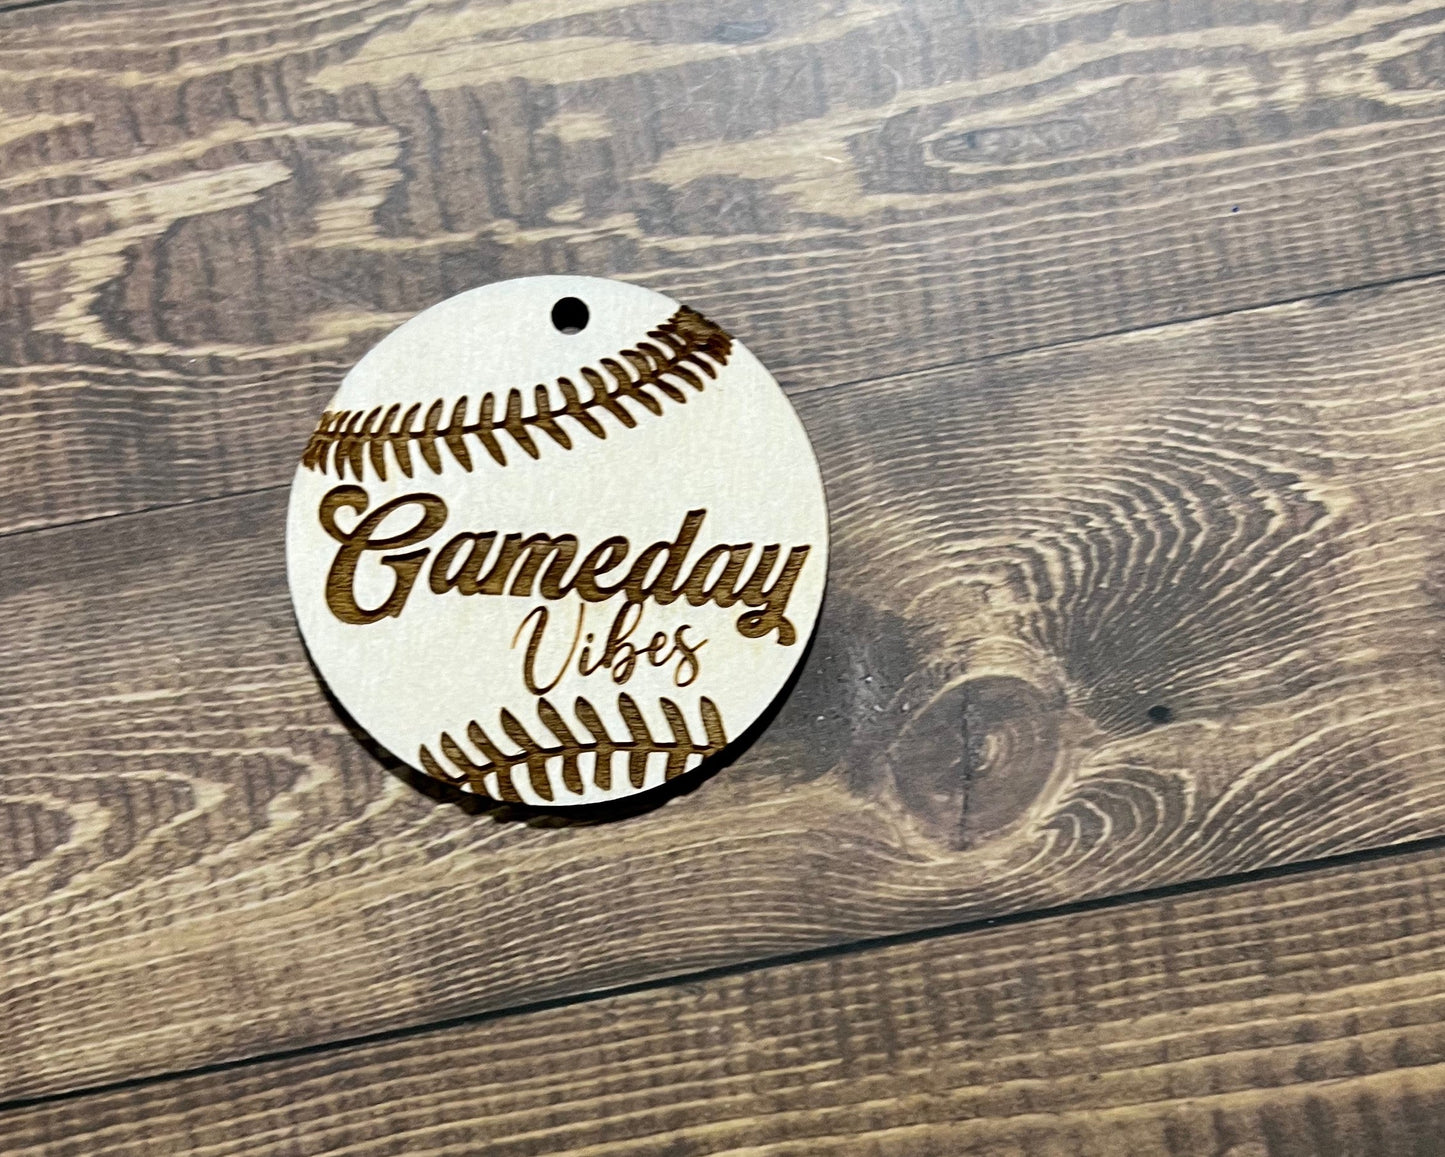 Game Day Vibes, Baseball Keychains